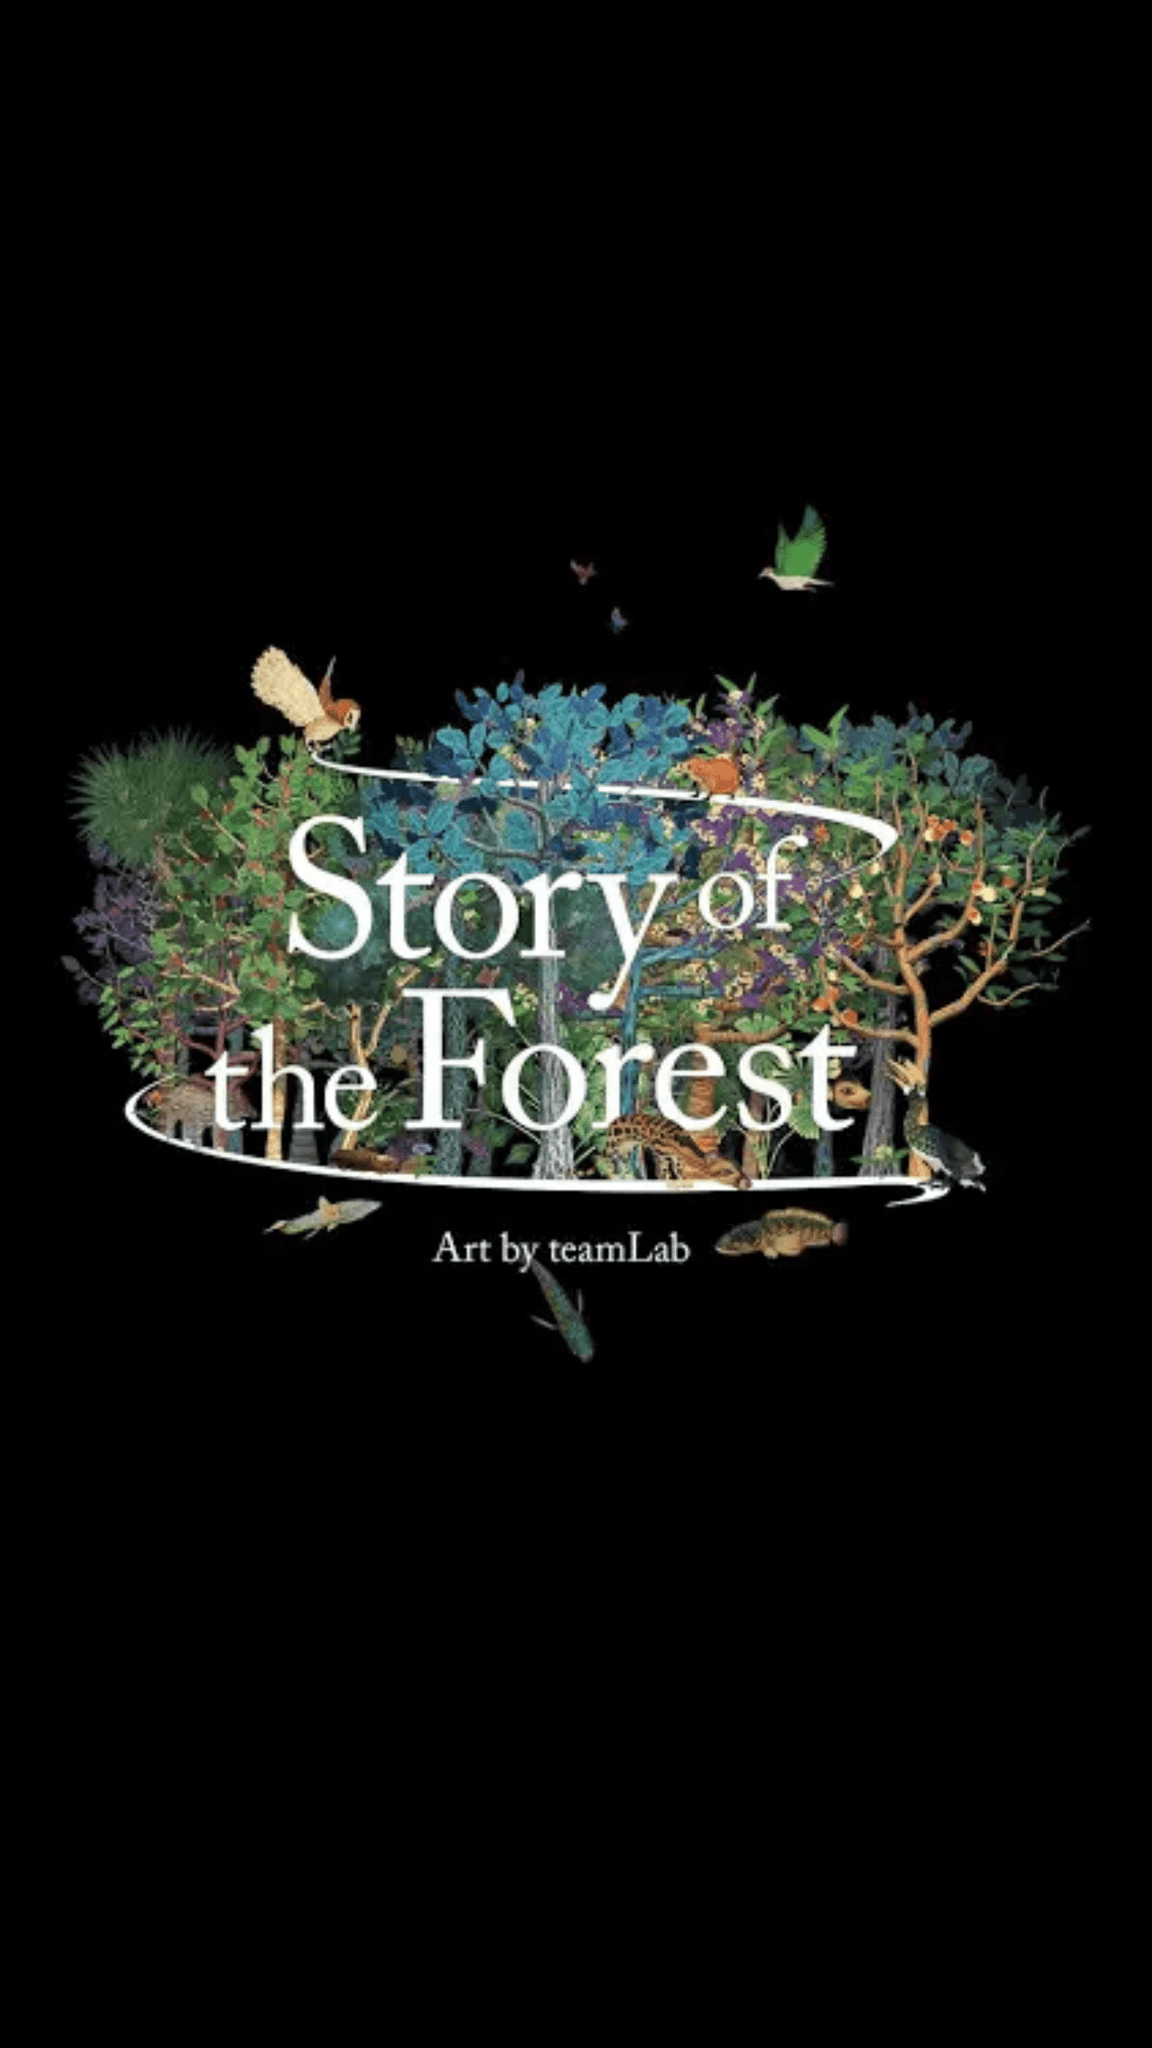 Places to go this Weekend: Story of the Forest